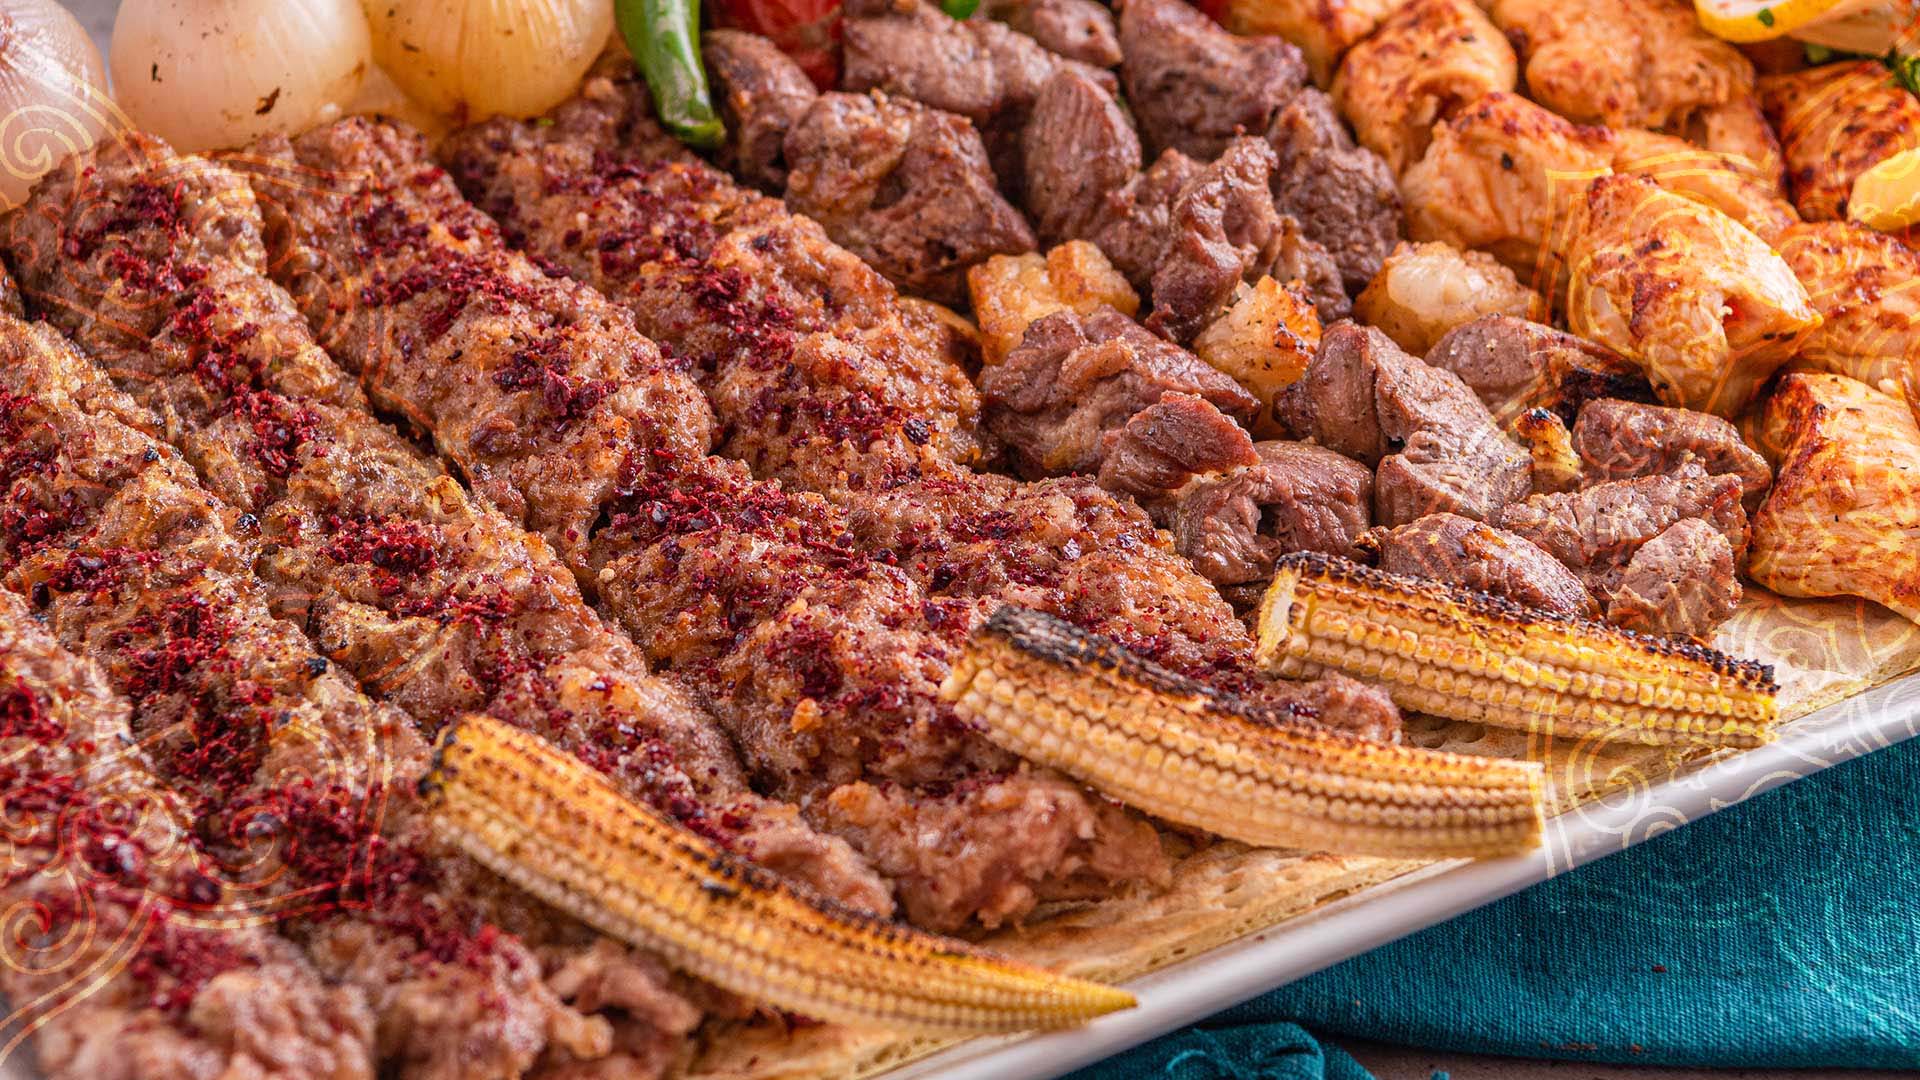 Some of the Popular Iraqi Grilled Dishes to Try:​